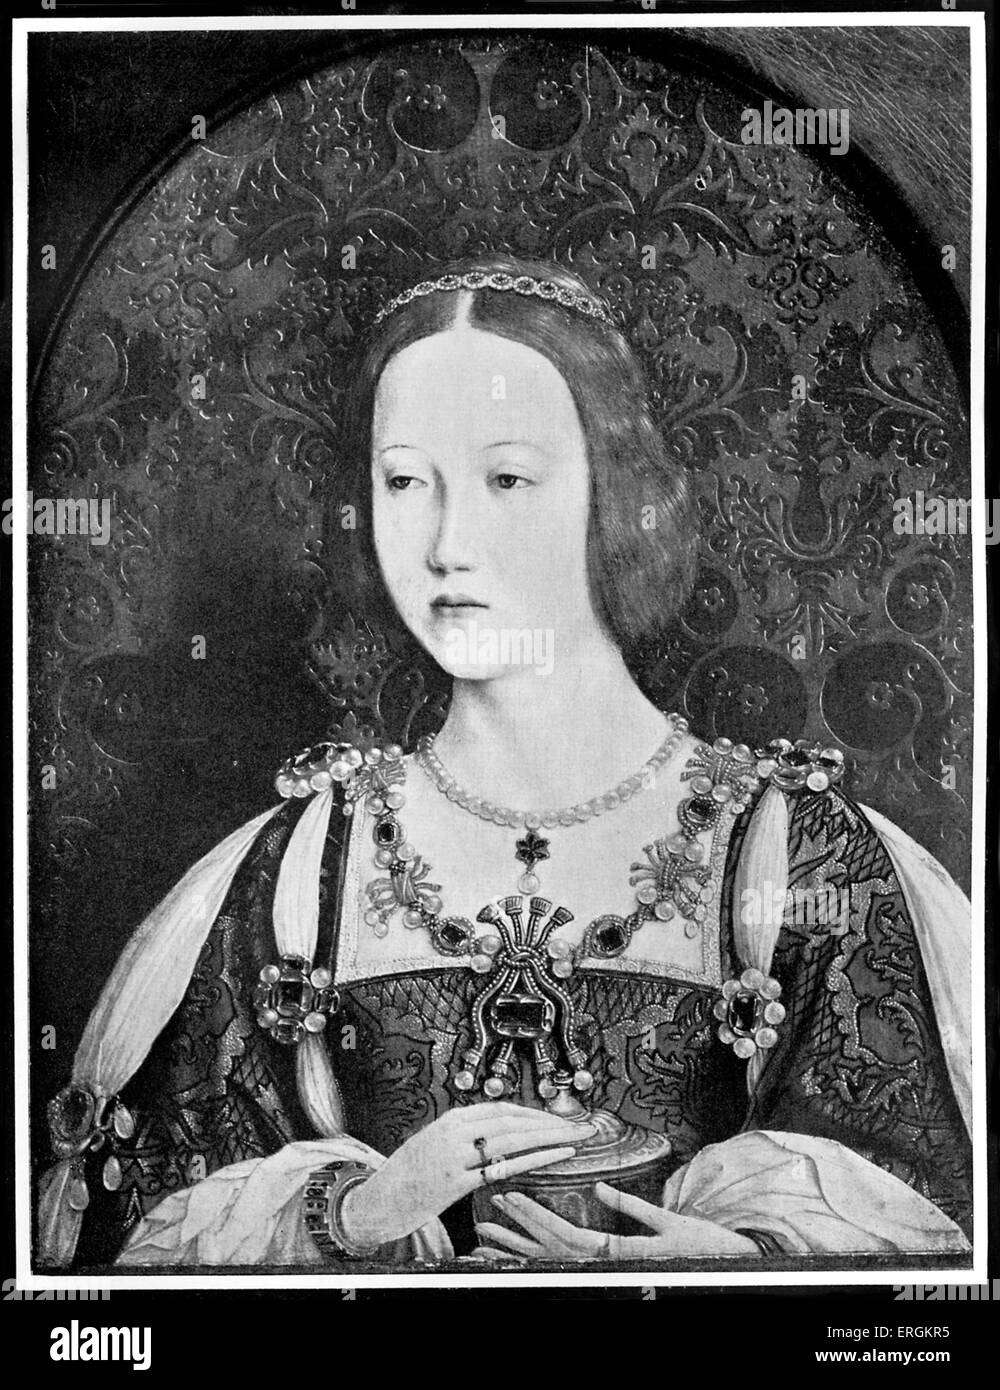 Princess Mary Tudor (1496 - 1533). Queen consort of France for a year in 1514 following her marriage to Louis XII (1462 - 1515). Sister to King Henry VIII of England (1491 - 1547). Portrait by Jehan Perreal (c. 1450 - 1530) in 1514. Stock Photo